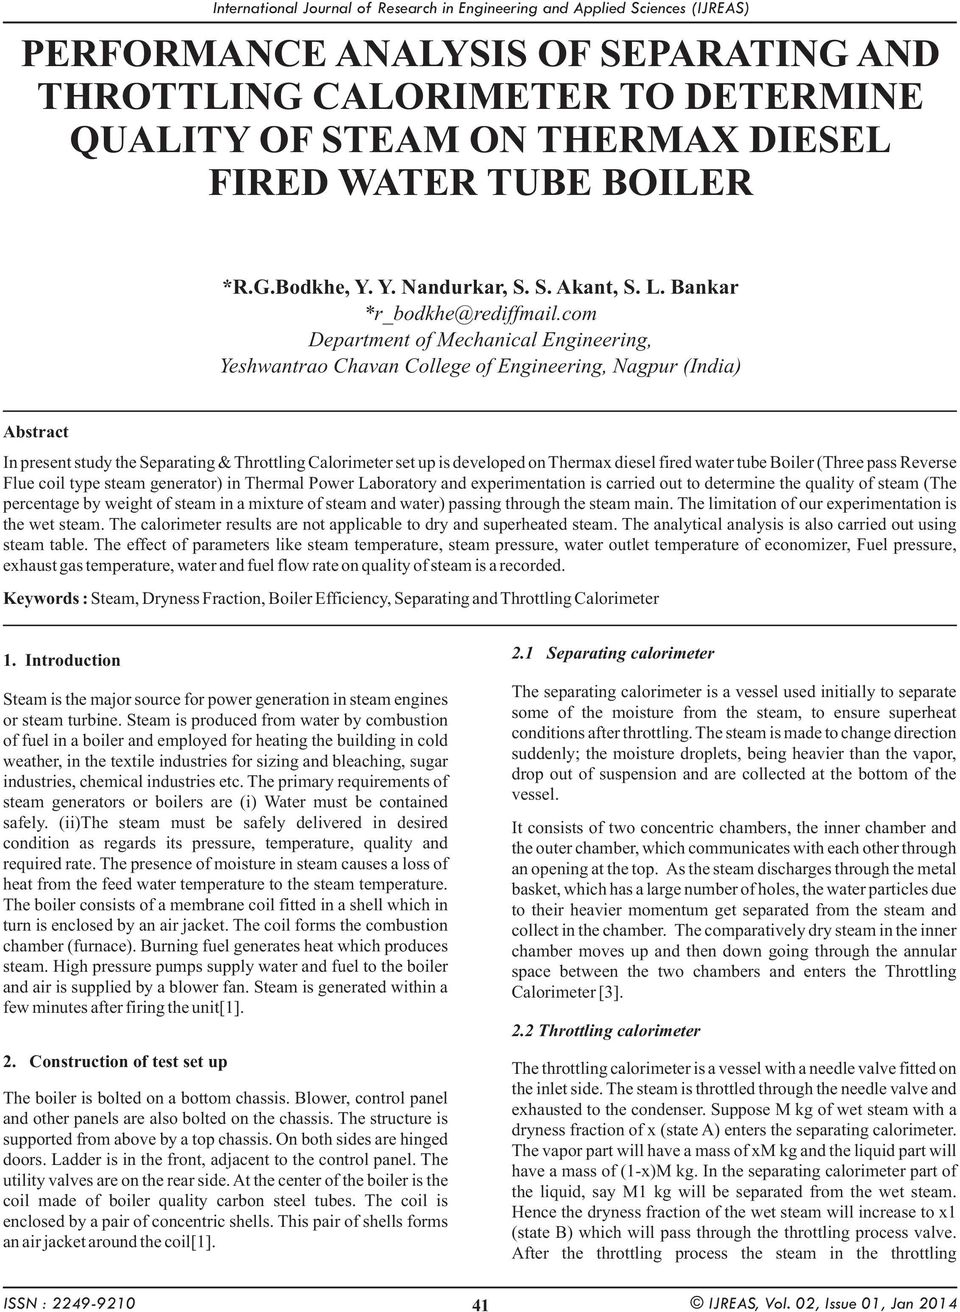 PERFORMANCE ANALYSIS OF SEPARATING AND THROTTLING CALORIMETER TO DETERMINE  QUALITY OF STEAM ON THERMAX DIESEL FIRED WATER TUBE BOILER - PDF Free  Download